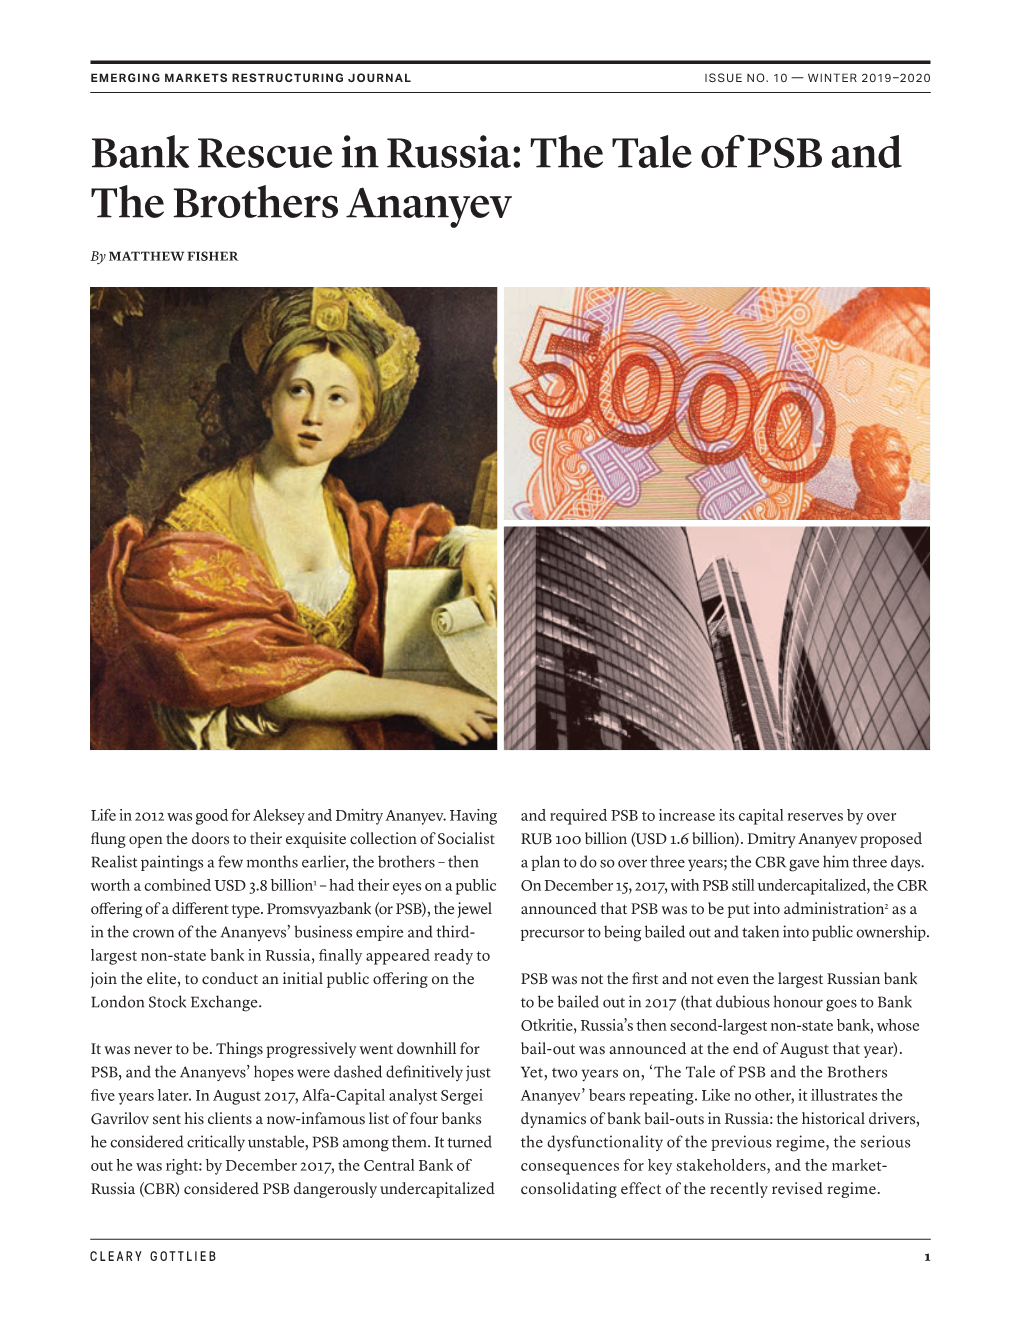 Bank Rescue in Russia: the Tale of PSB and the Brothers Ananyev